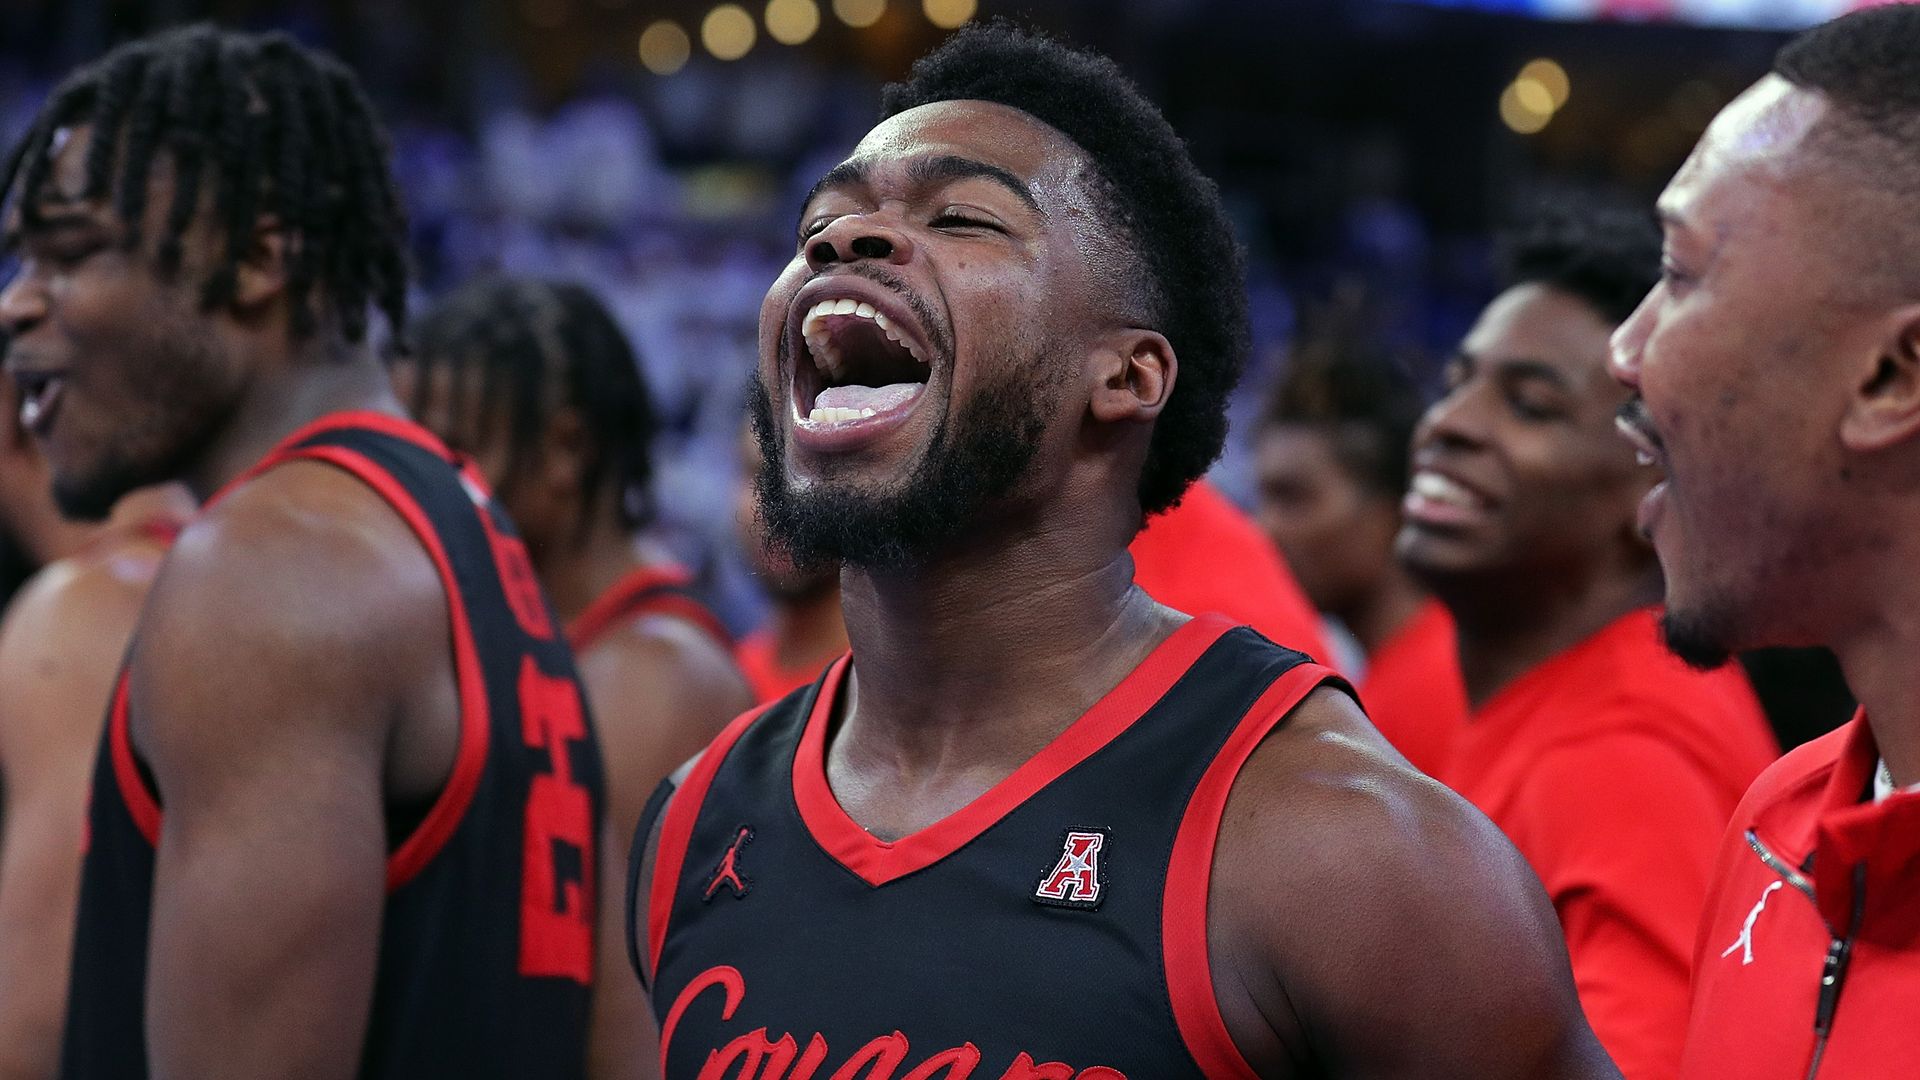 UH Cougars men's basketball player Jamal Shead, wearing a black and red jersey, shouts after scoring a game-winning point